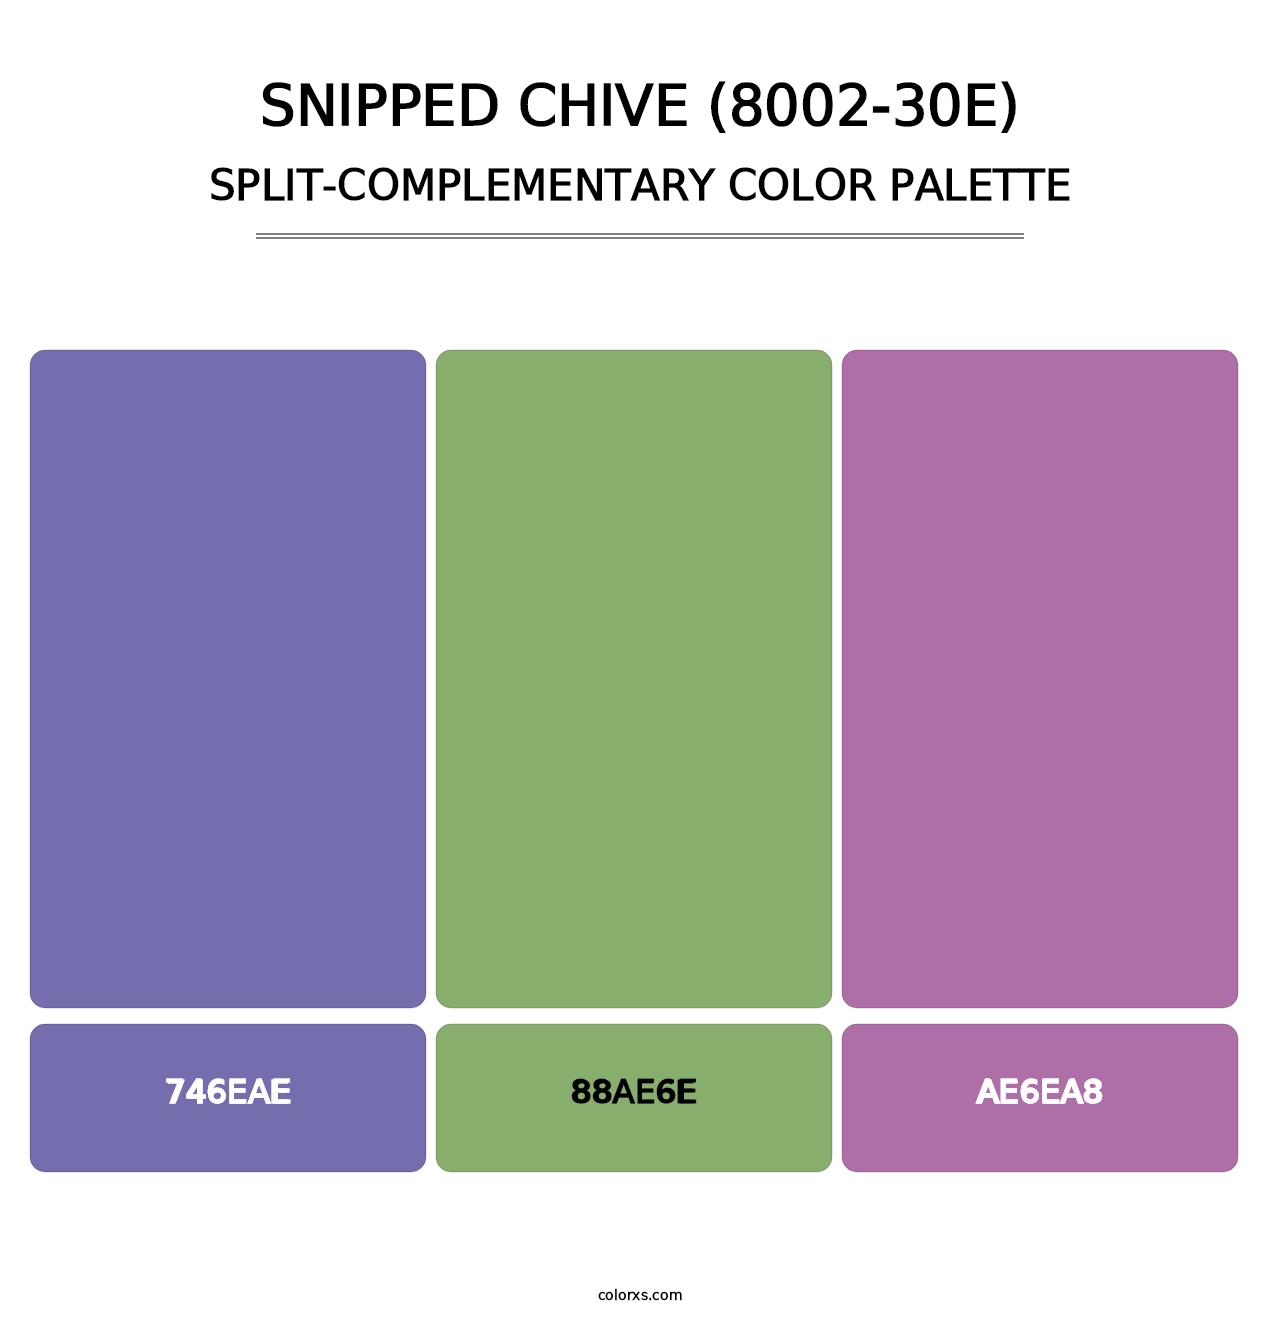 Snipped Chive (8002-30E) - Split-Complementary Color Palette